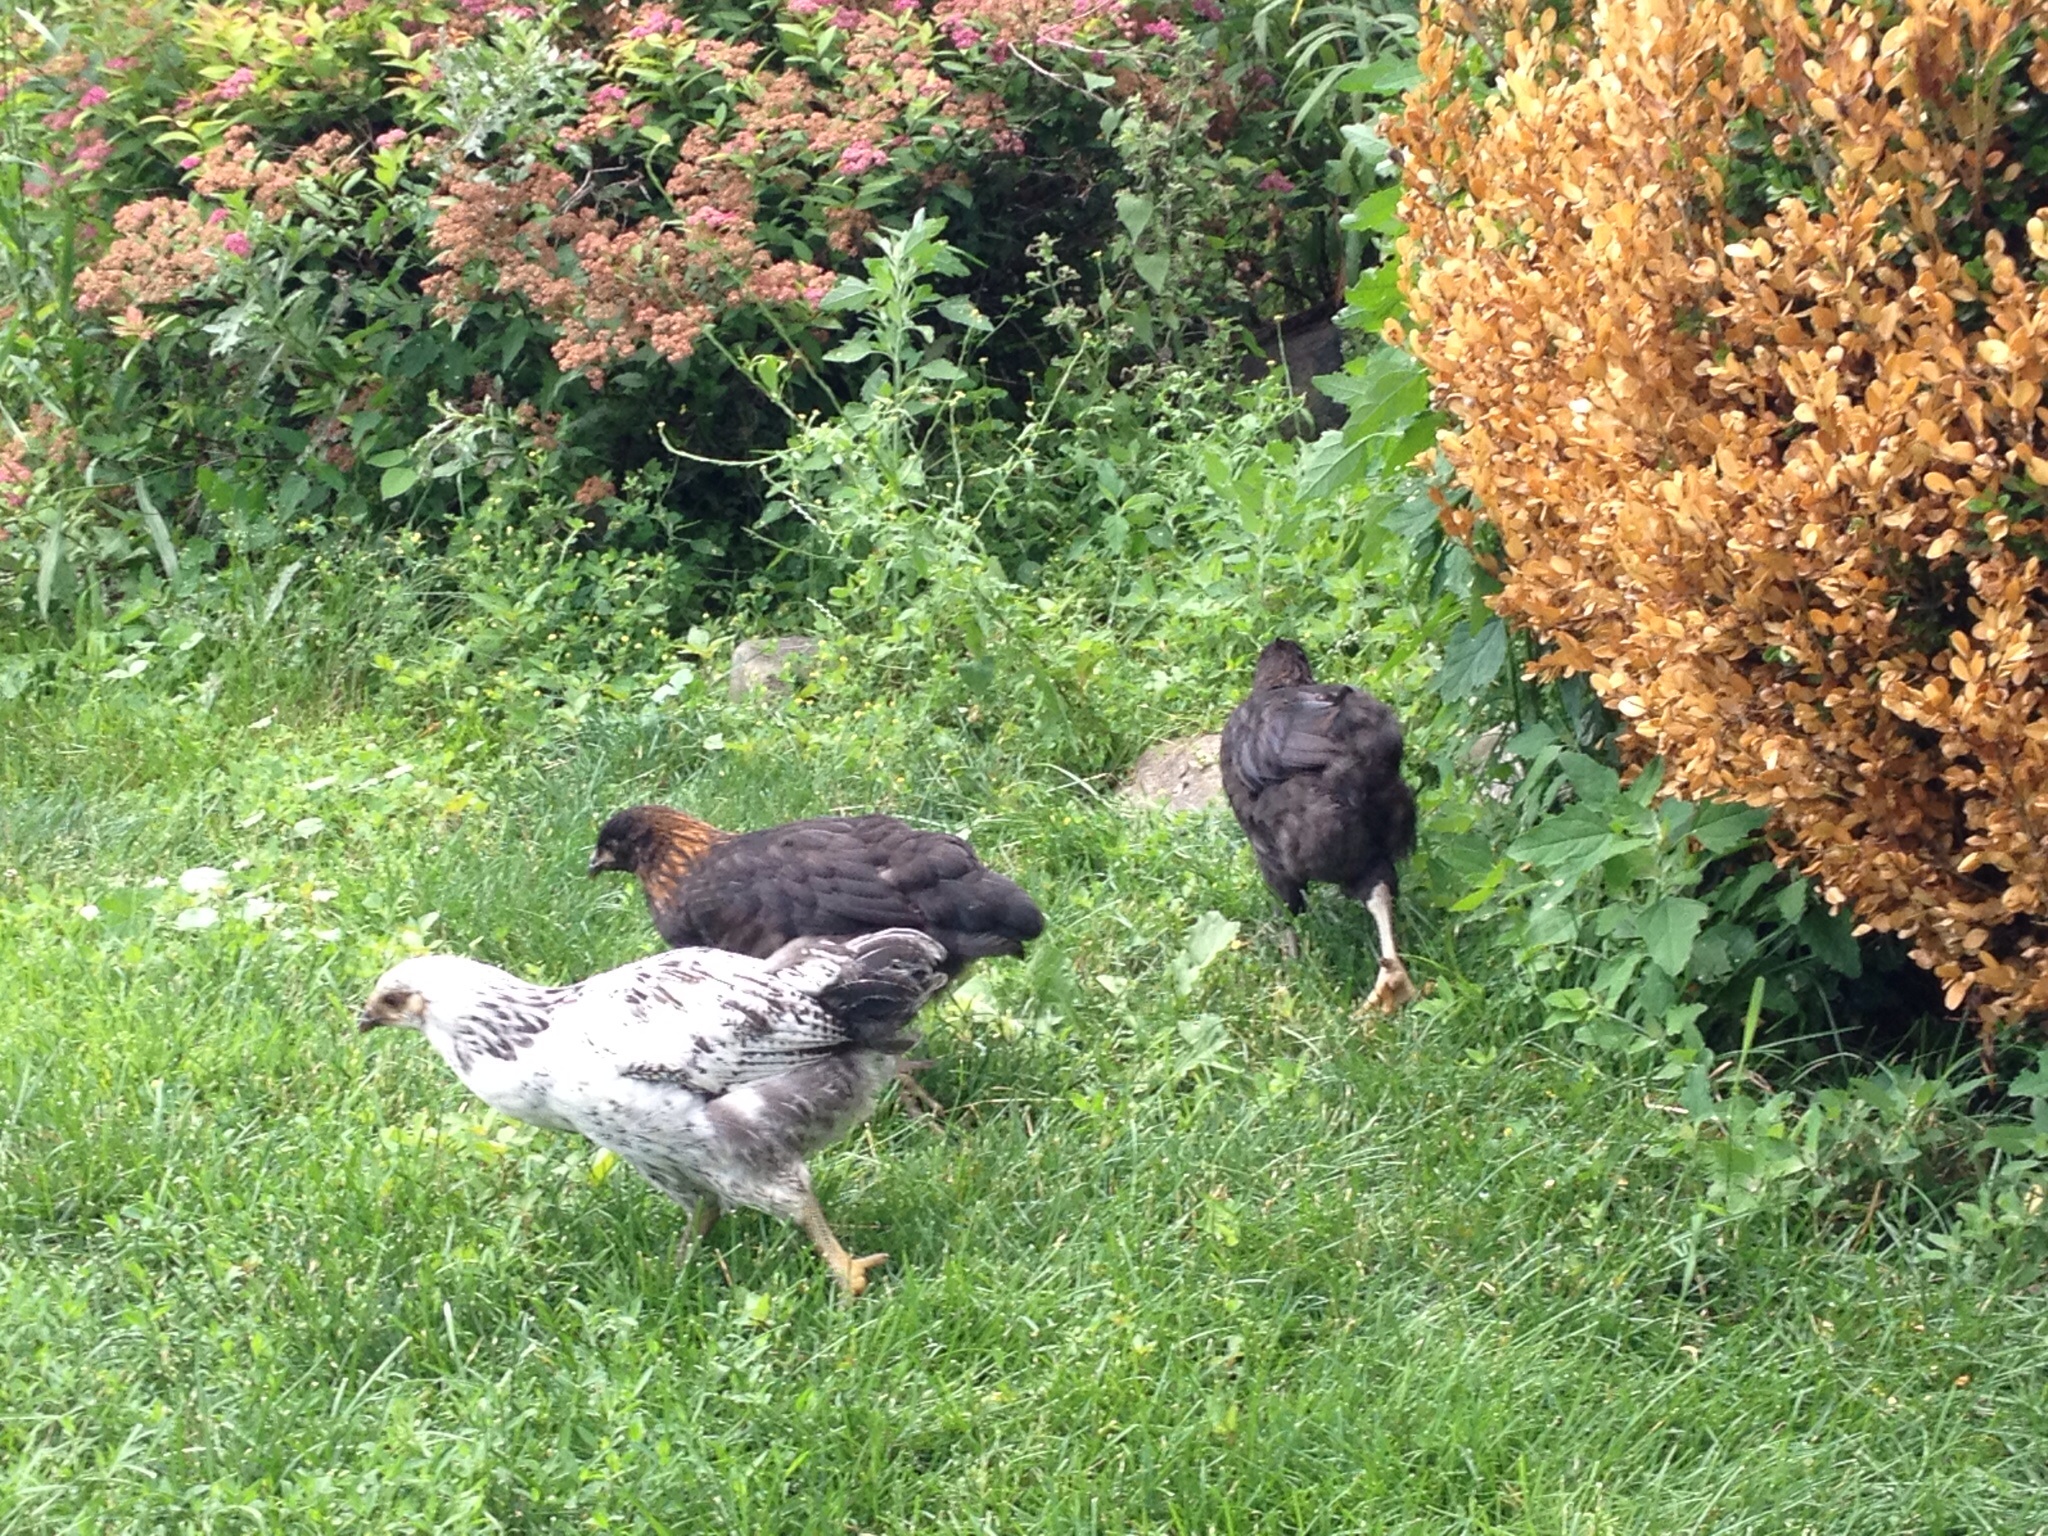 11 Sep. about 17 weeks. Lacey &'Kaia (OE) & Kali (Ameraucana ) in back